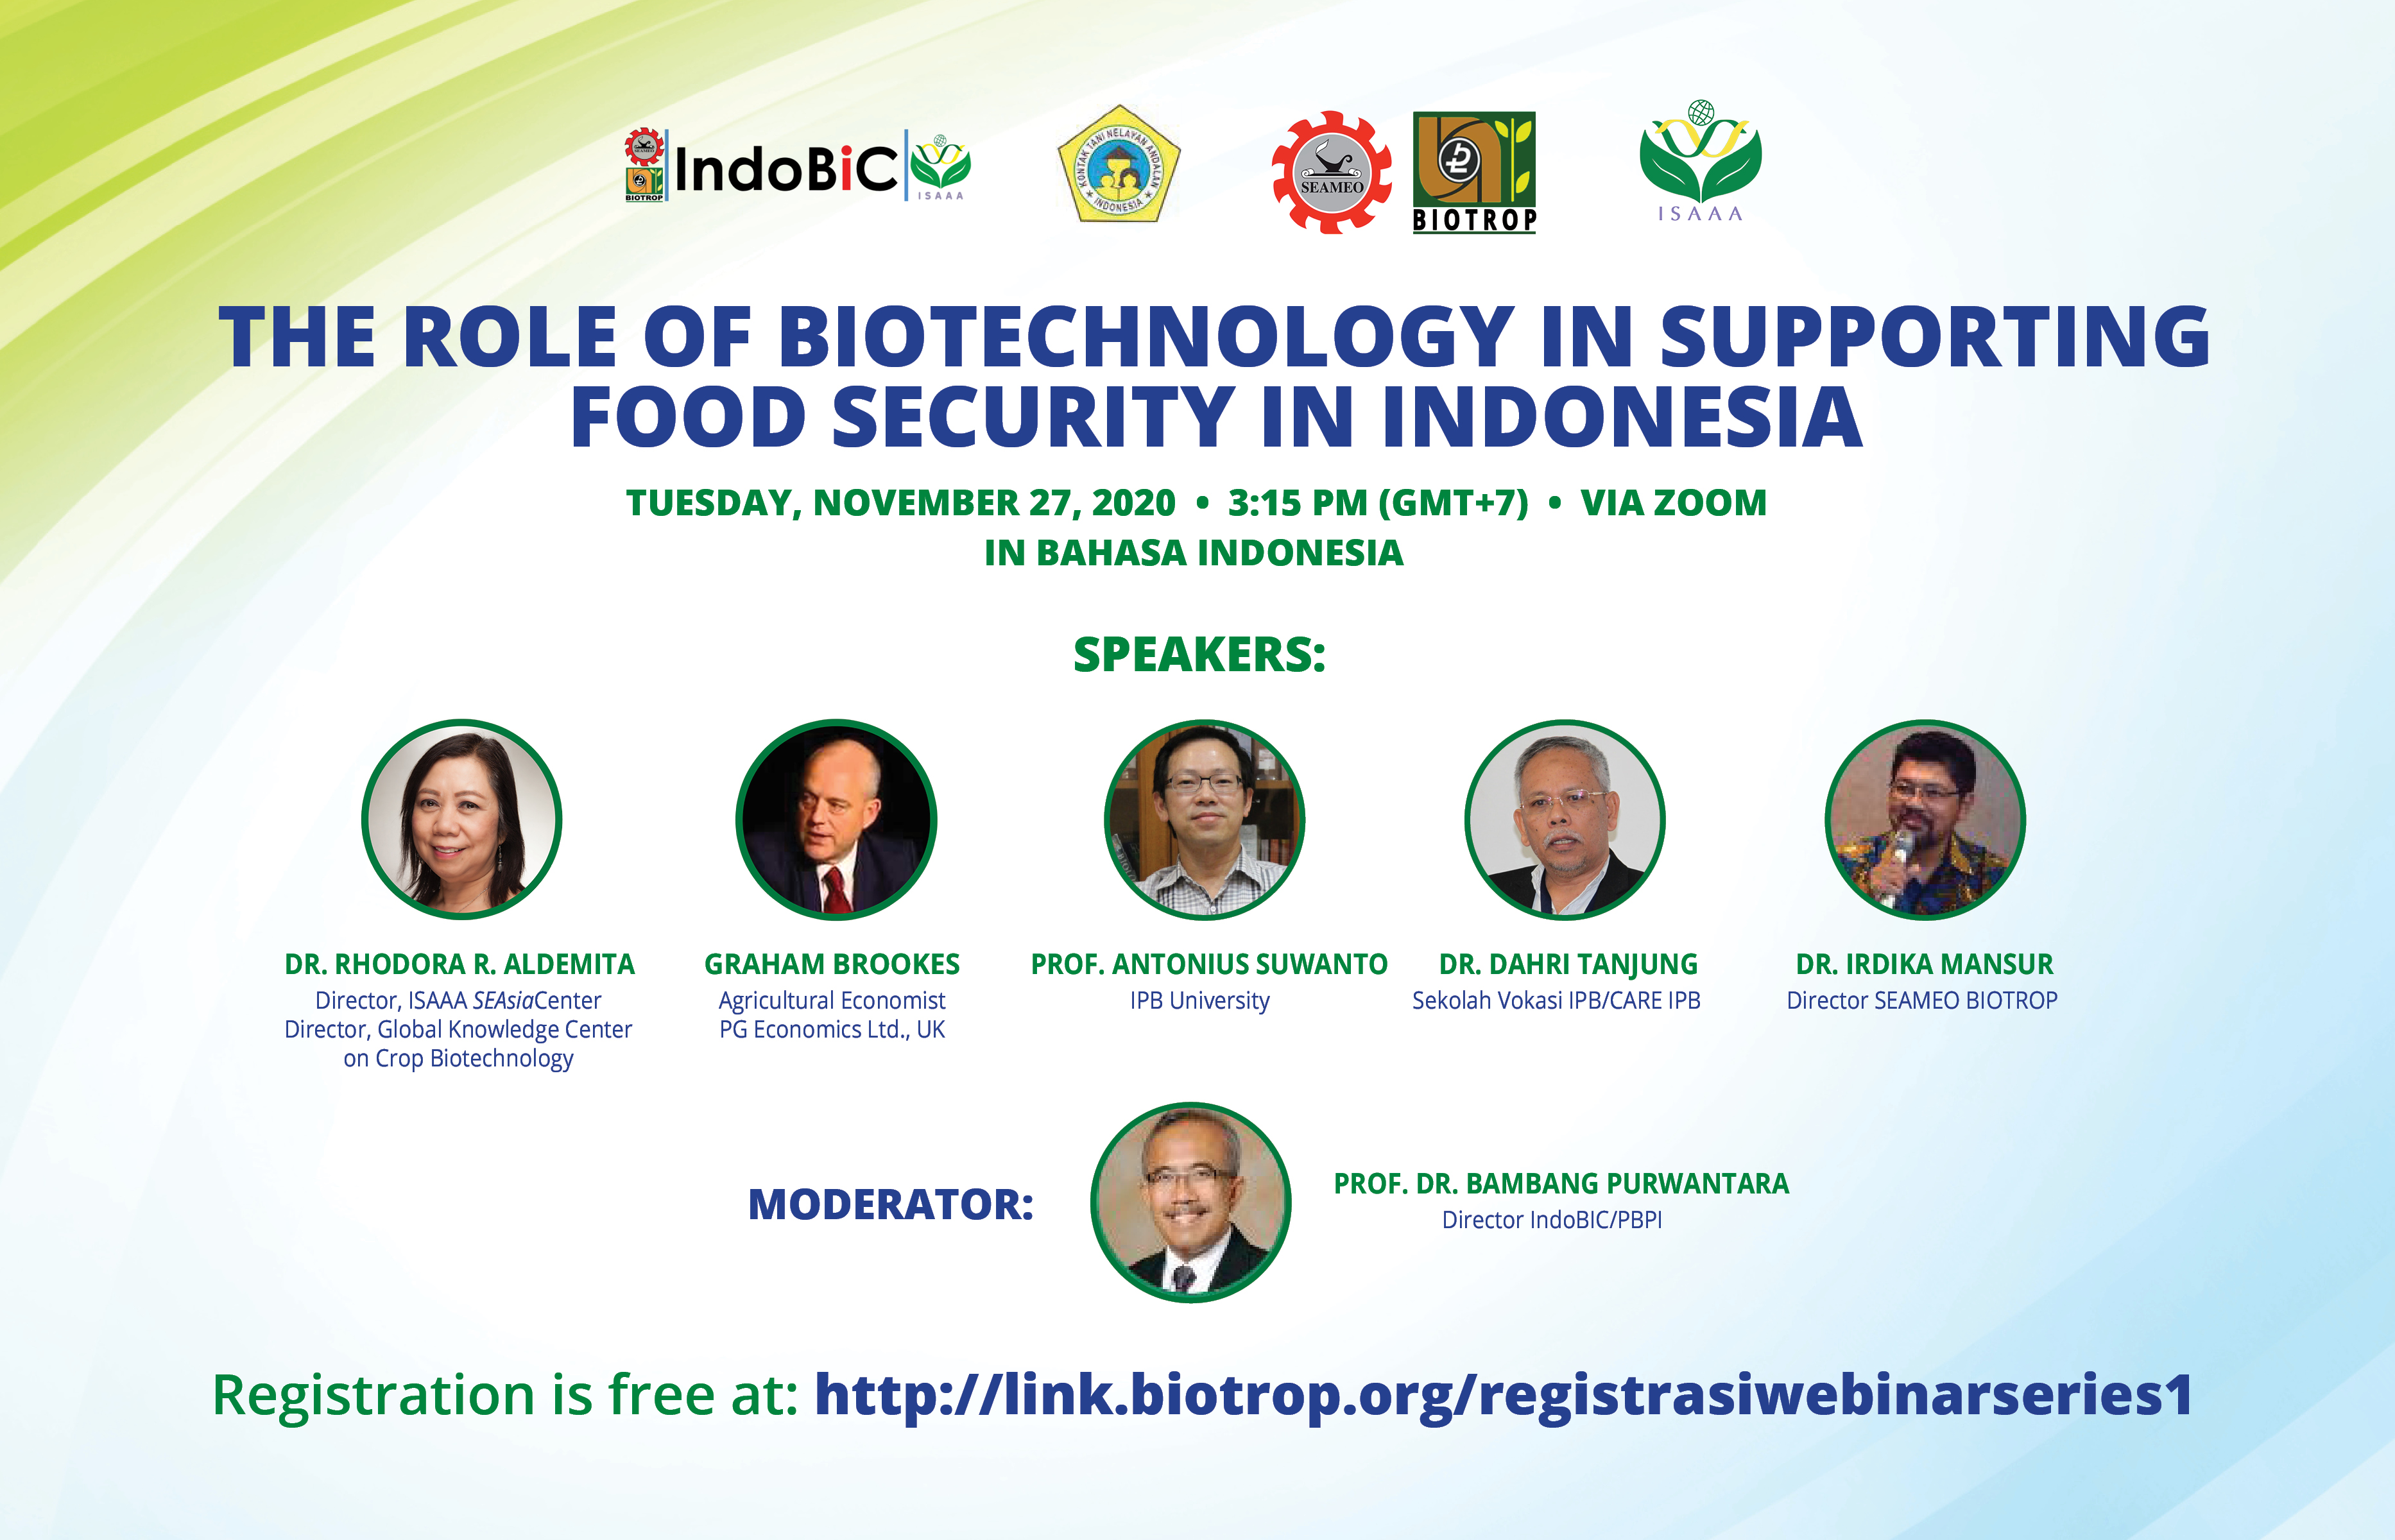 Biotech Experts to Tackle the Role of Biotech in Indonesia's Food